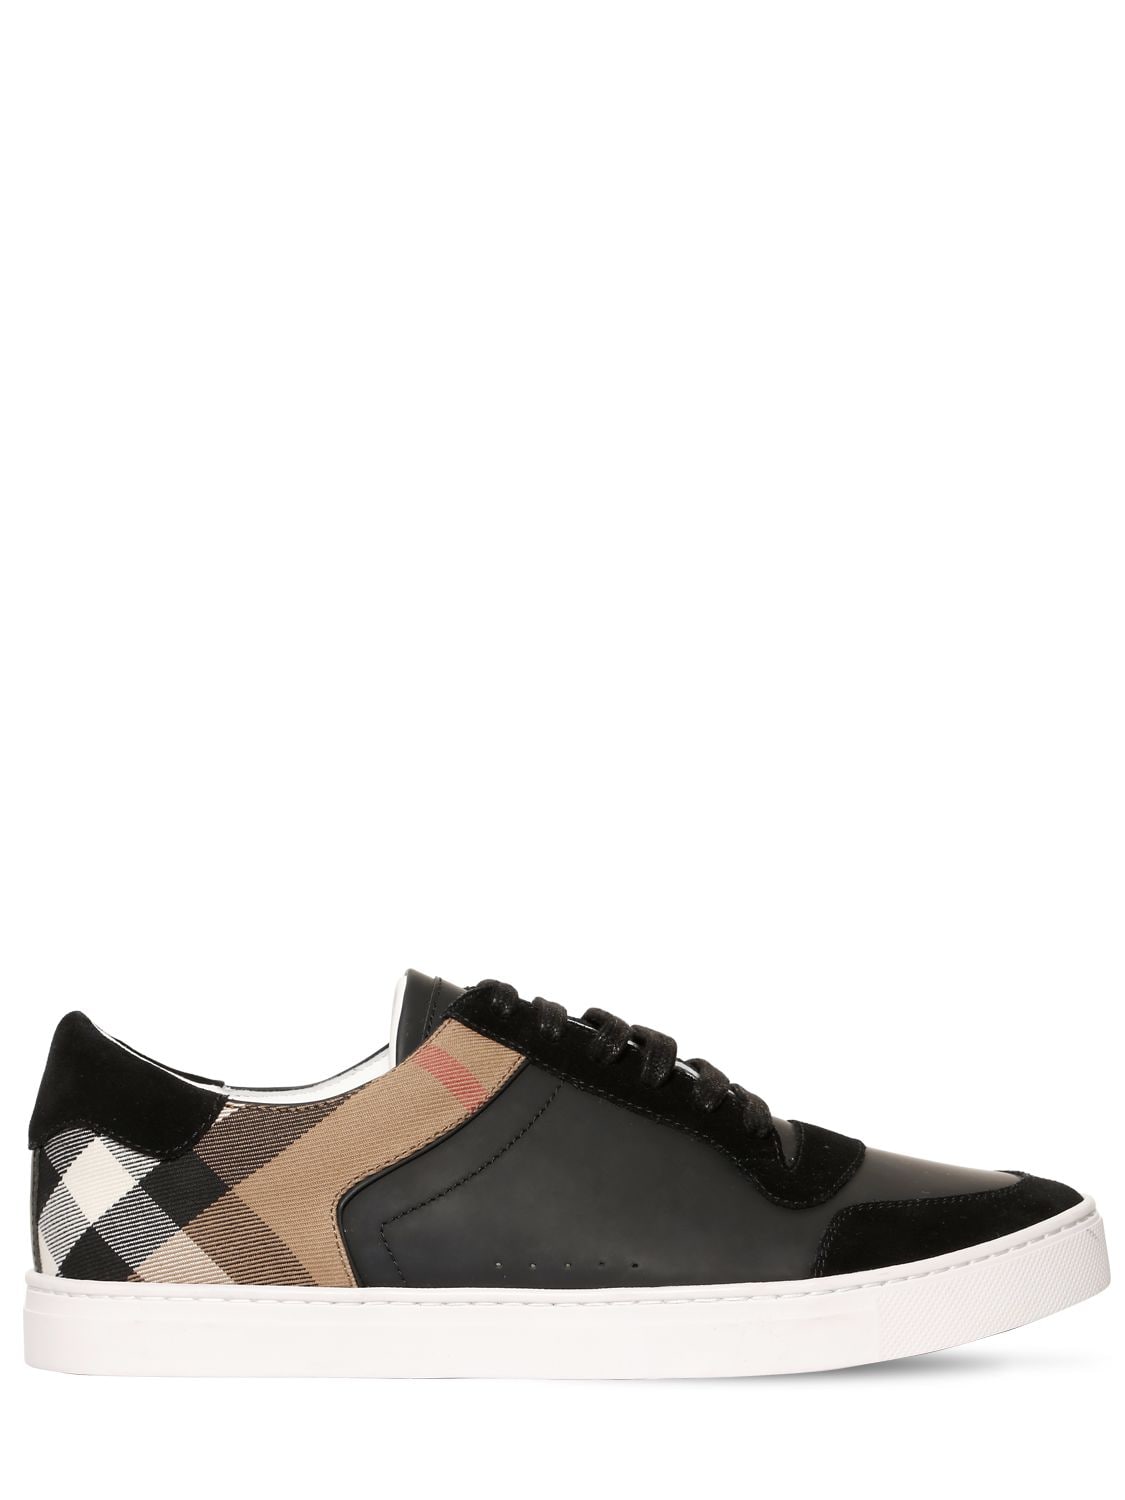 Burberry Newport Check Canvas & Leather Sneakers In Black